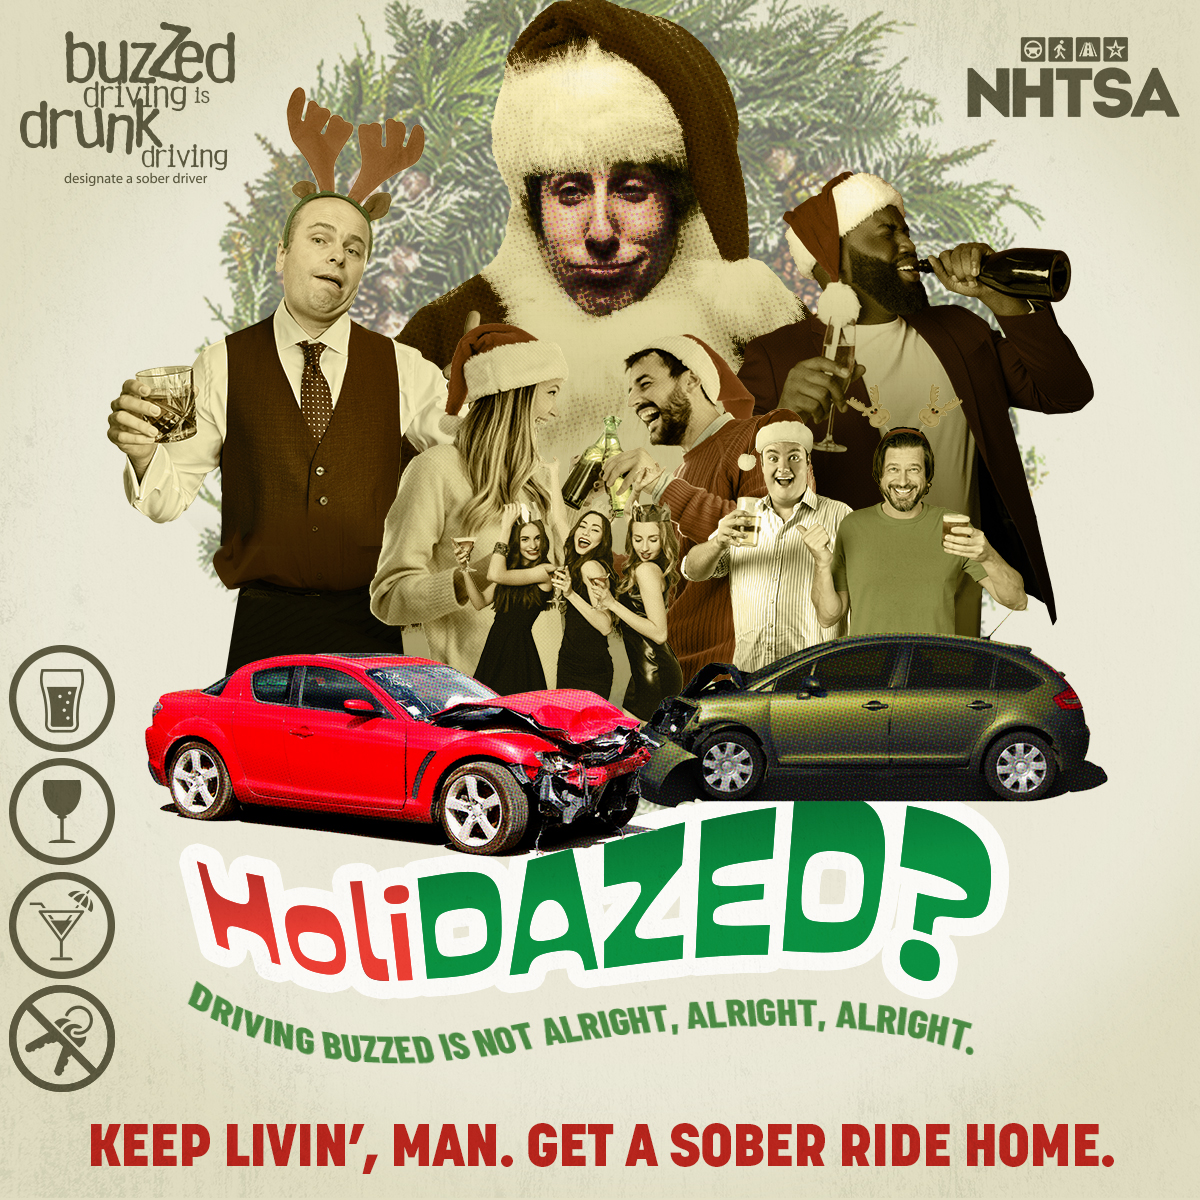 Buzzed Driving Is Drunk Driving campaign